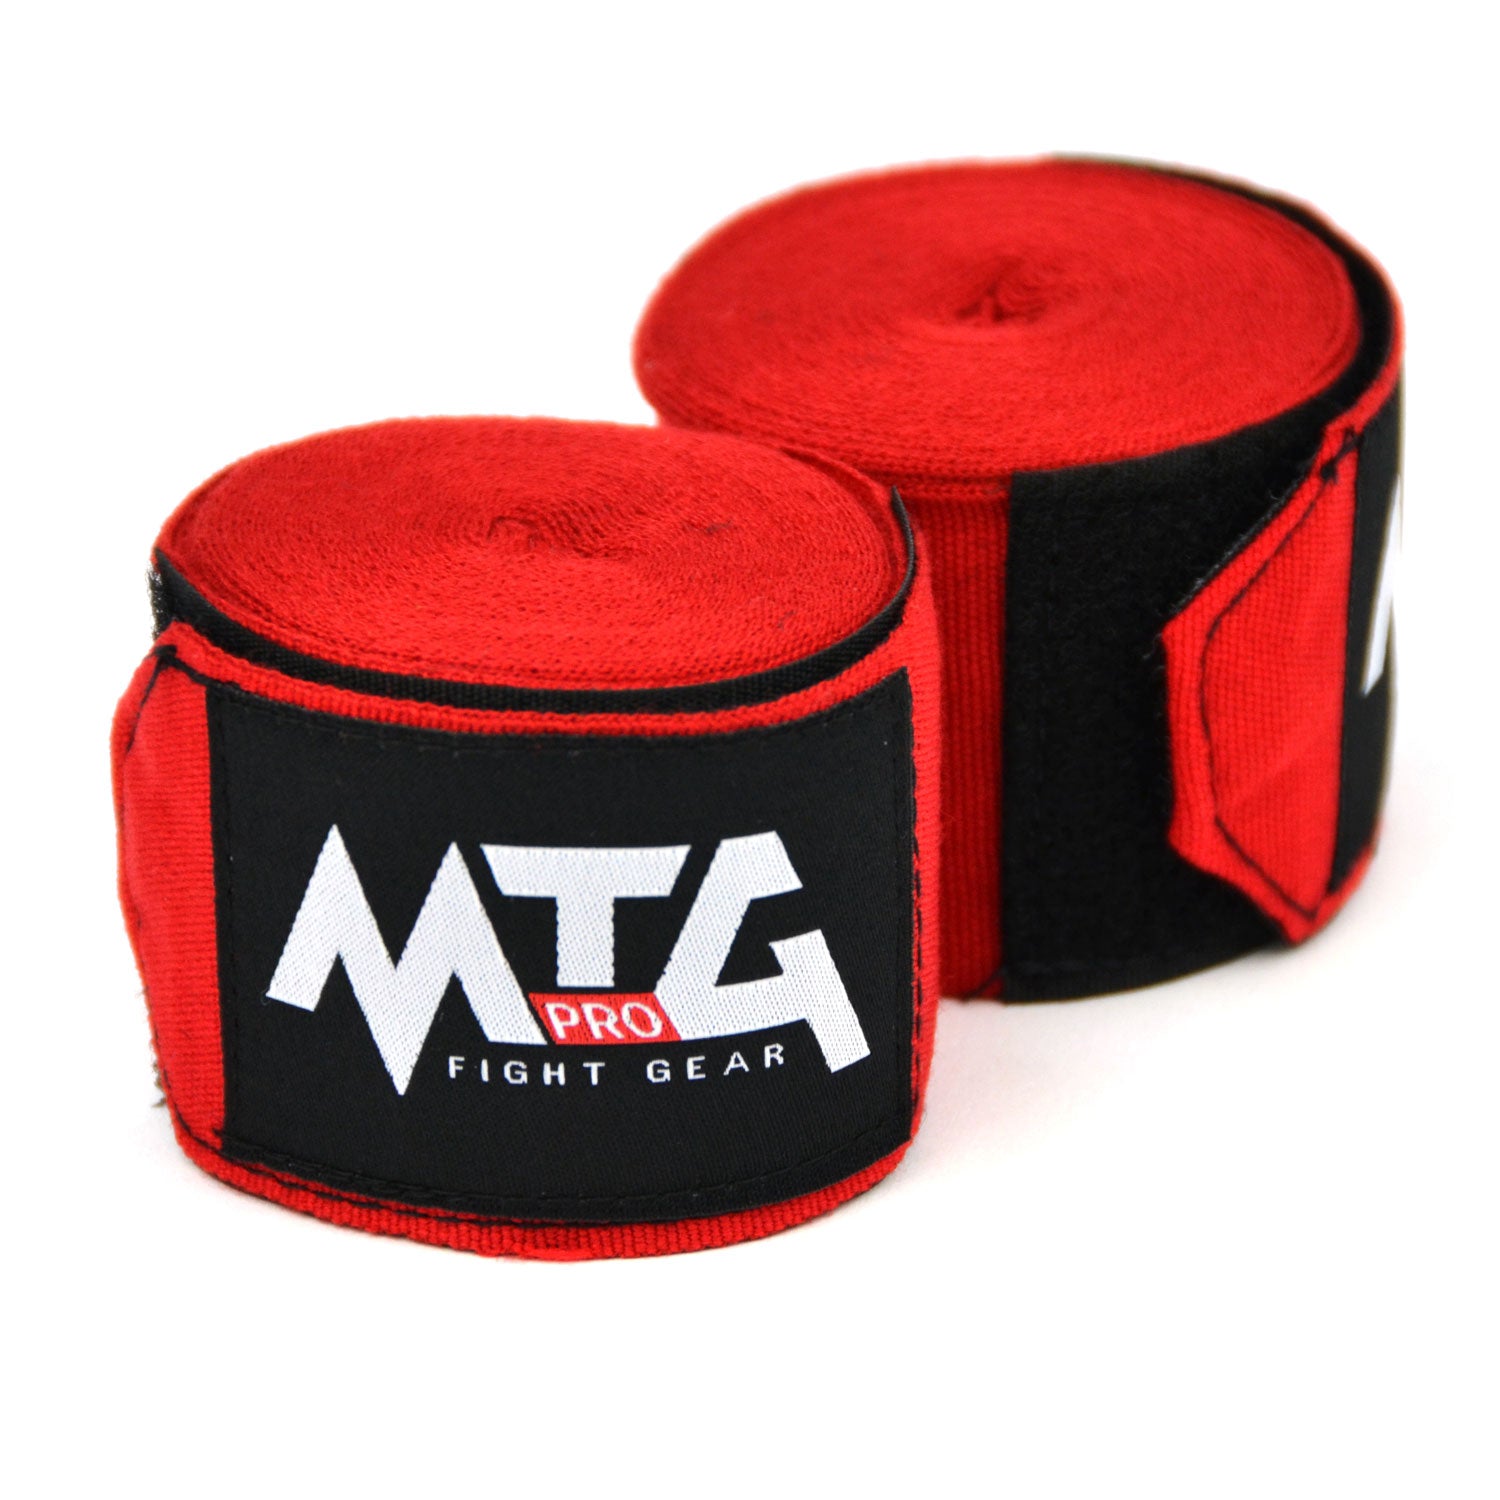 EH1 MTG Pro 5m Red Elasticated Hand Wraps